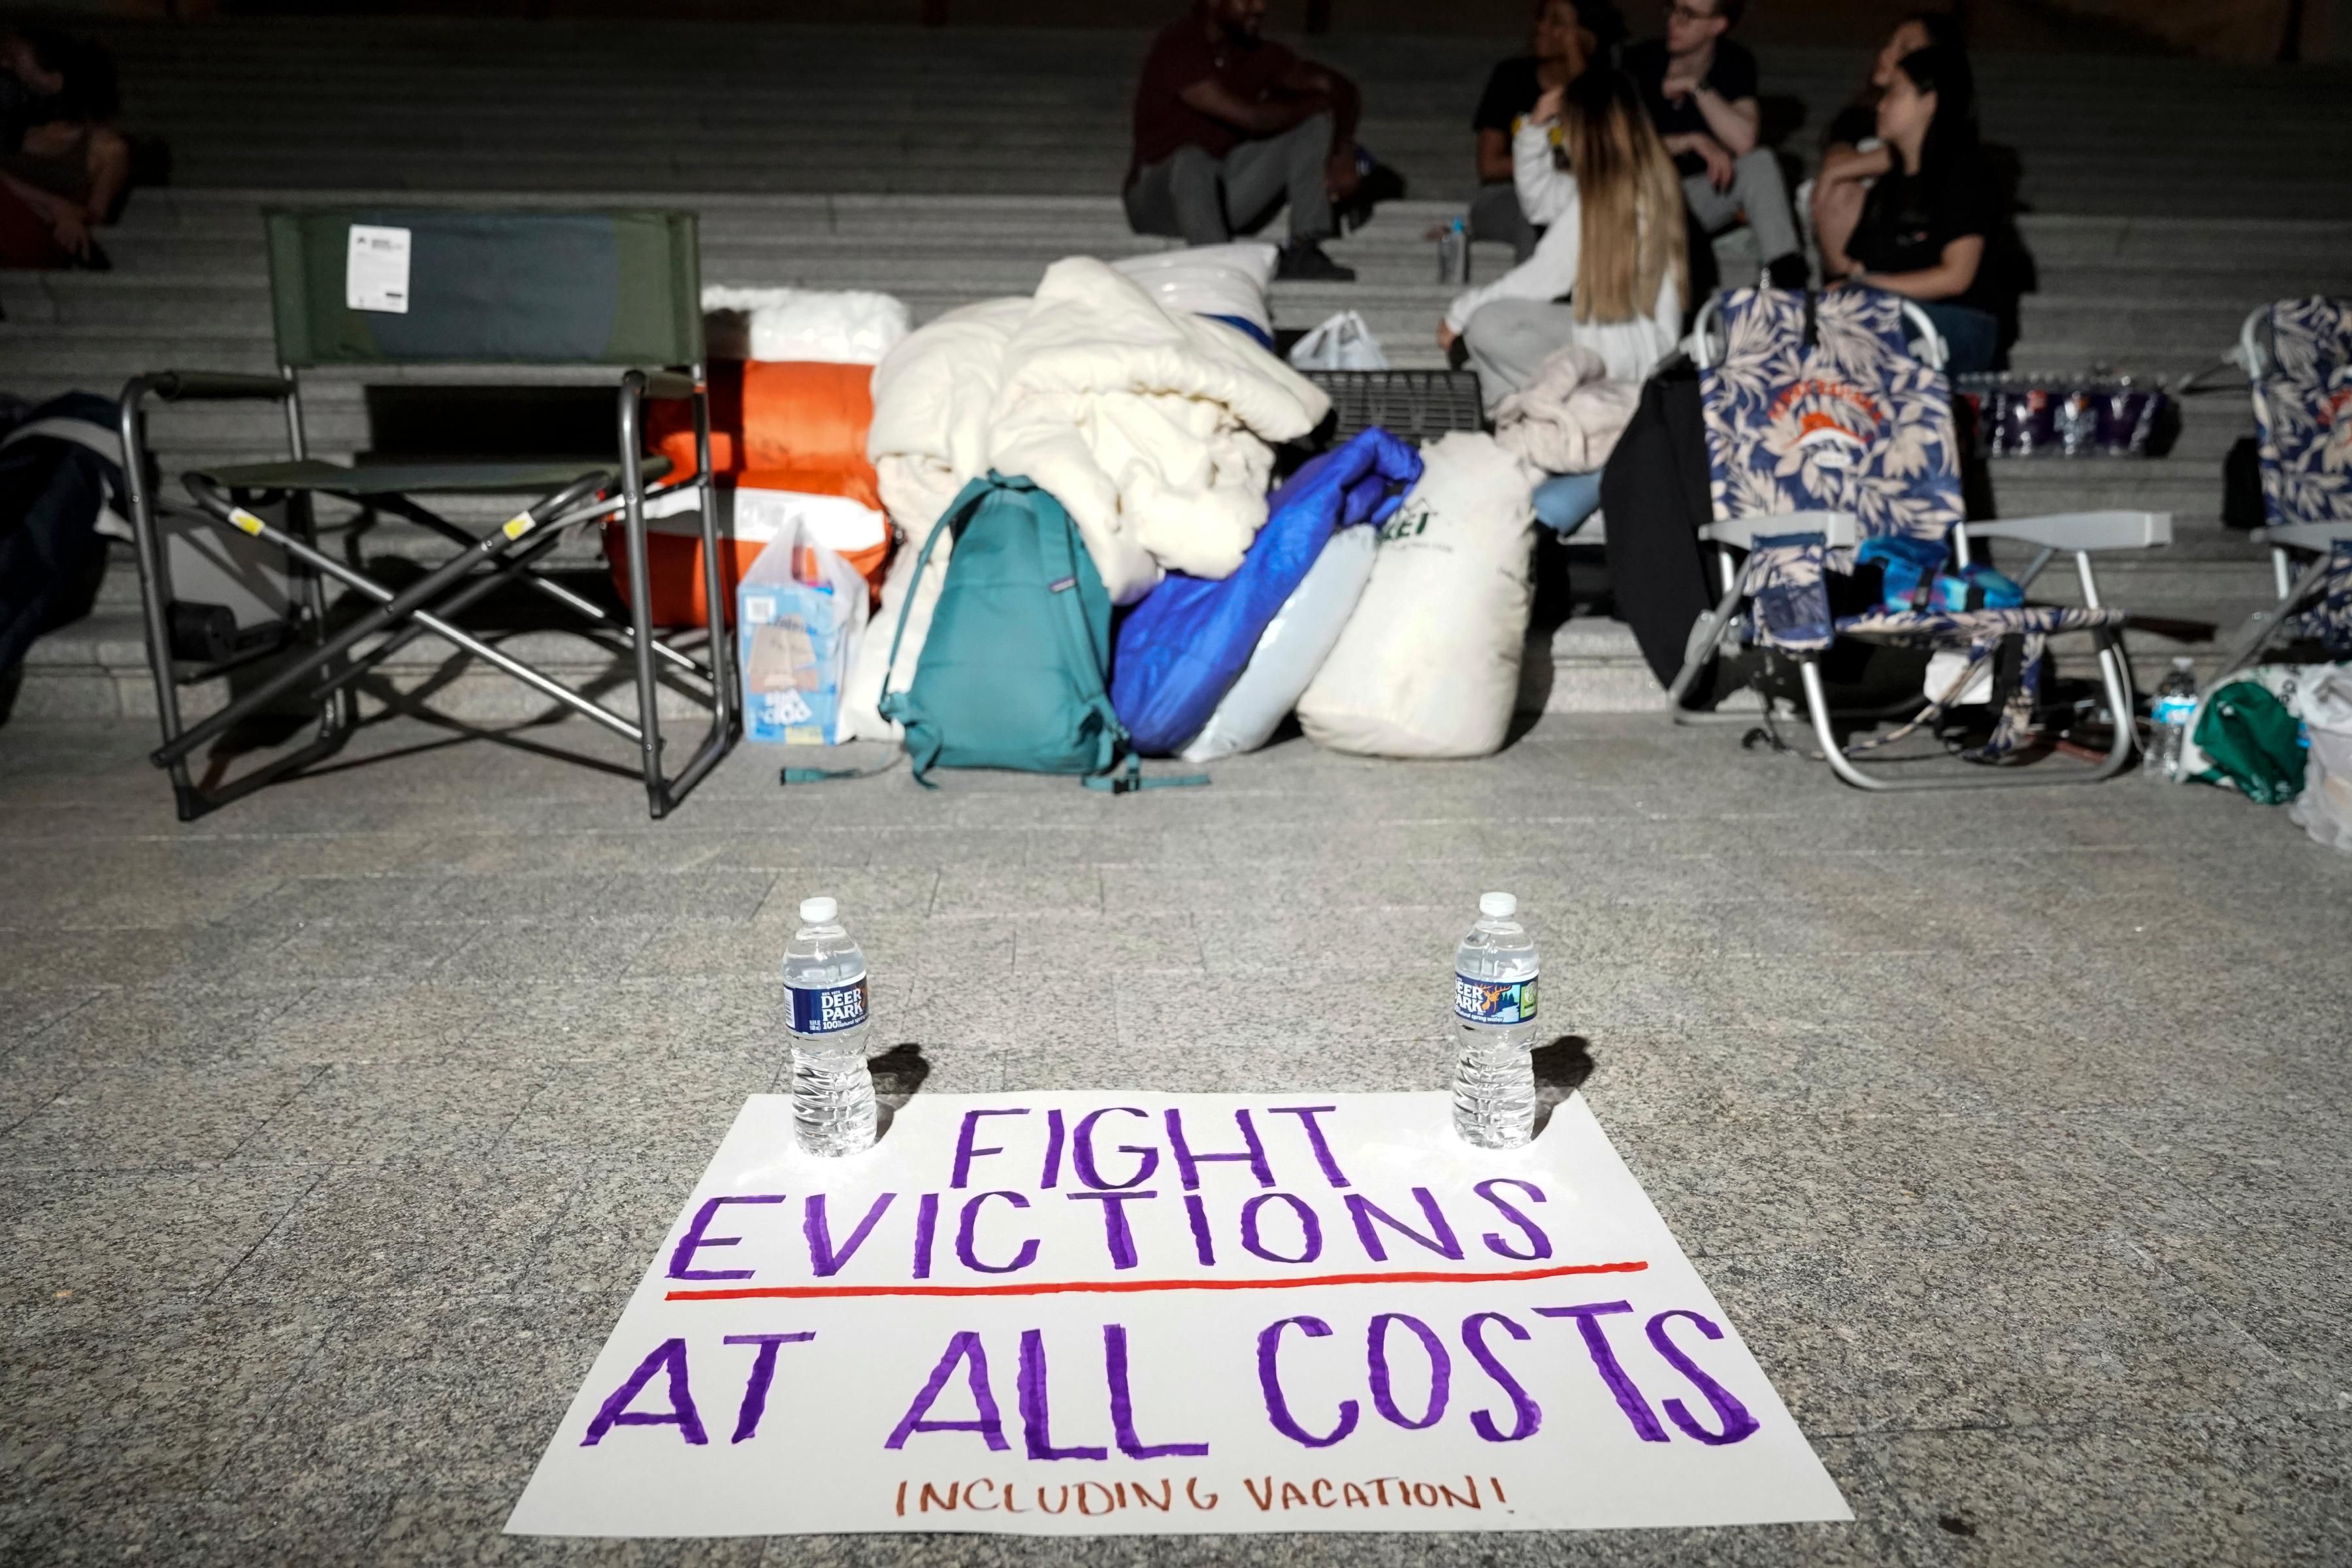 A sign urging Congress to fight evictions at all costs